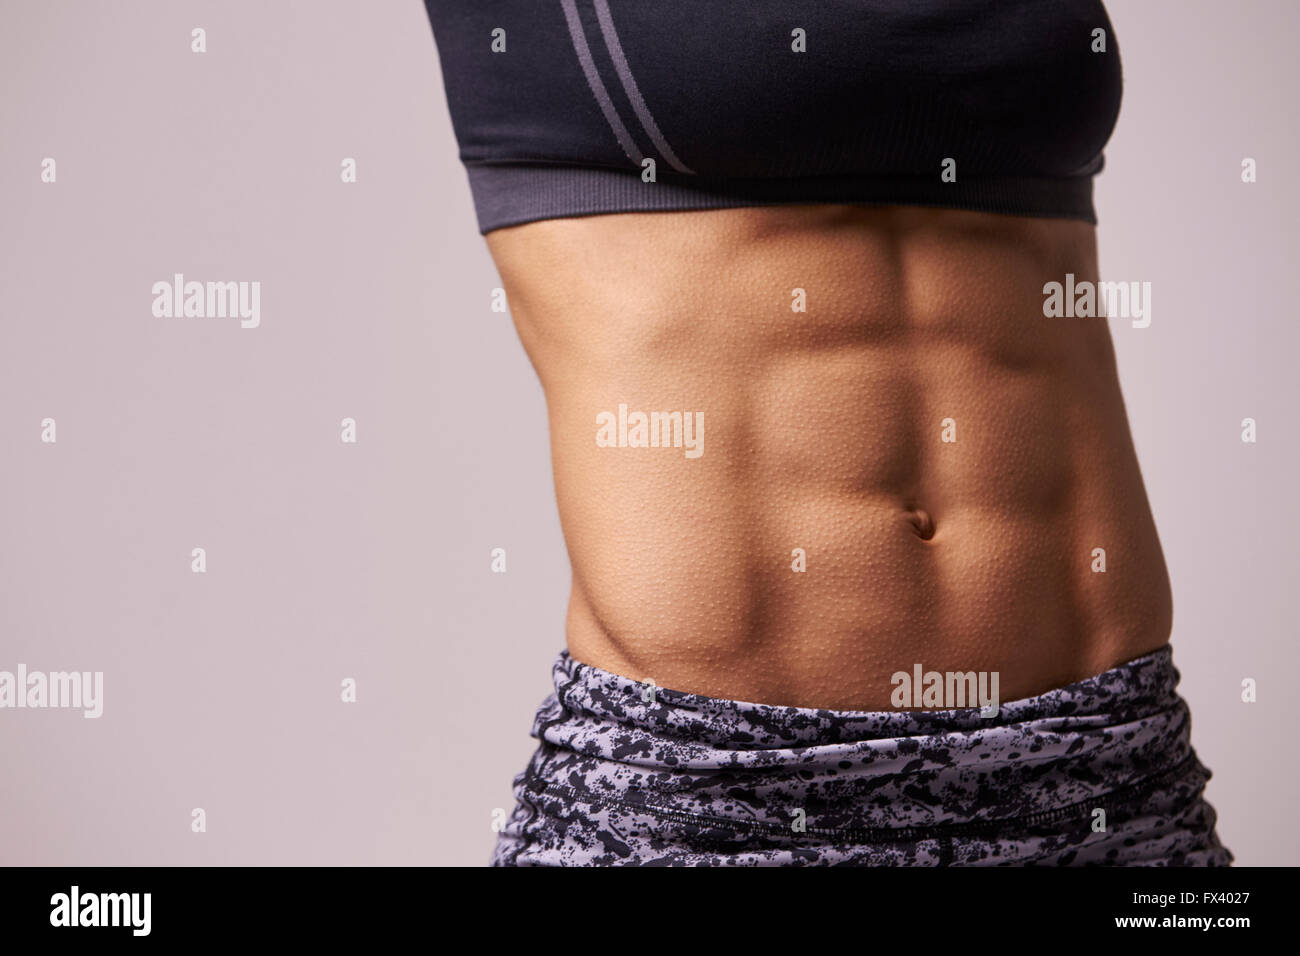 Mid-section crop shot of muscular young woman’s abs Stock Photo